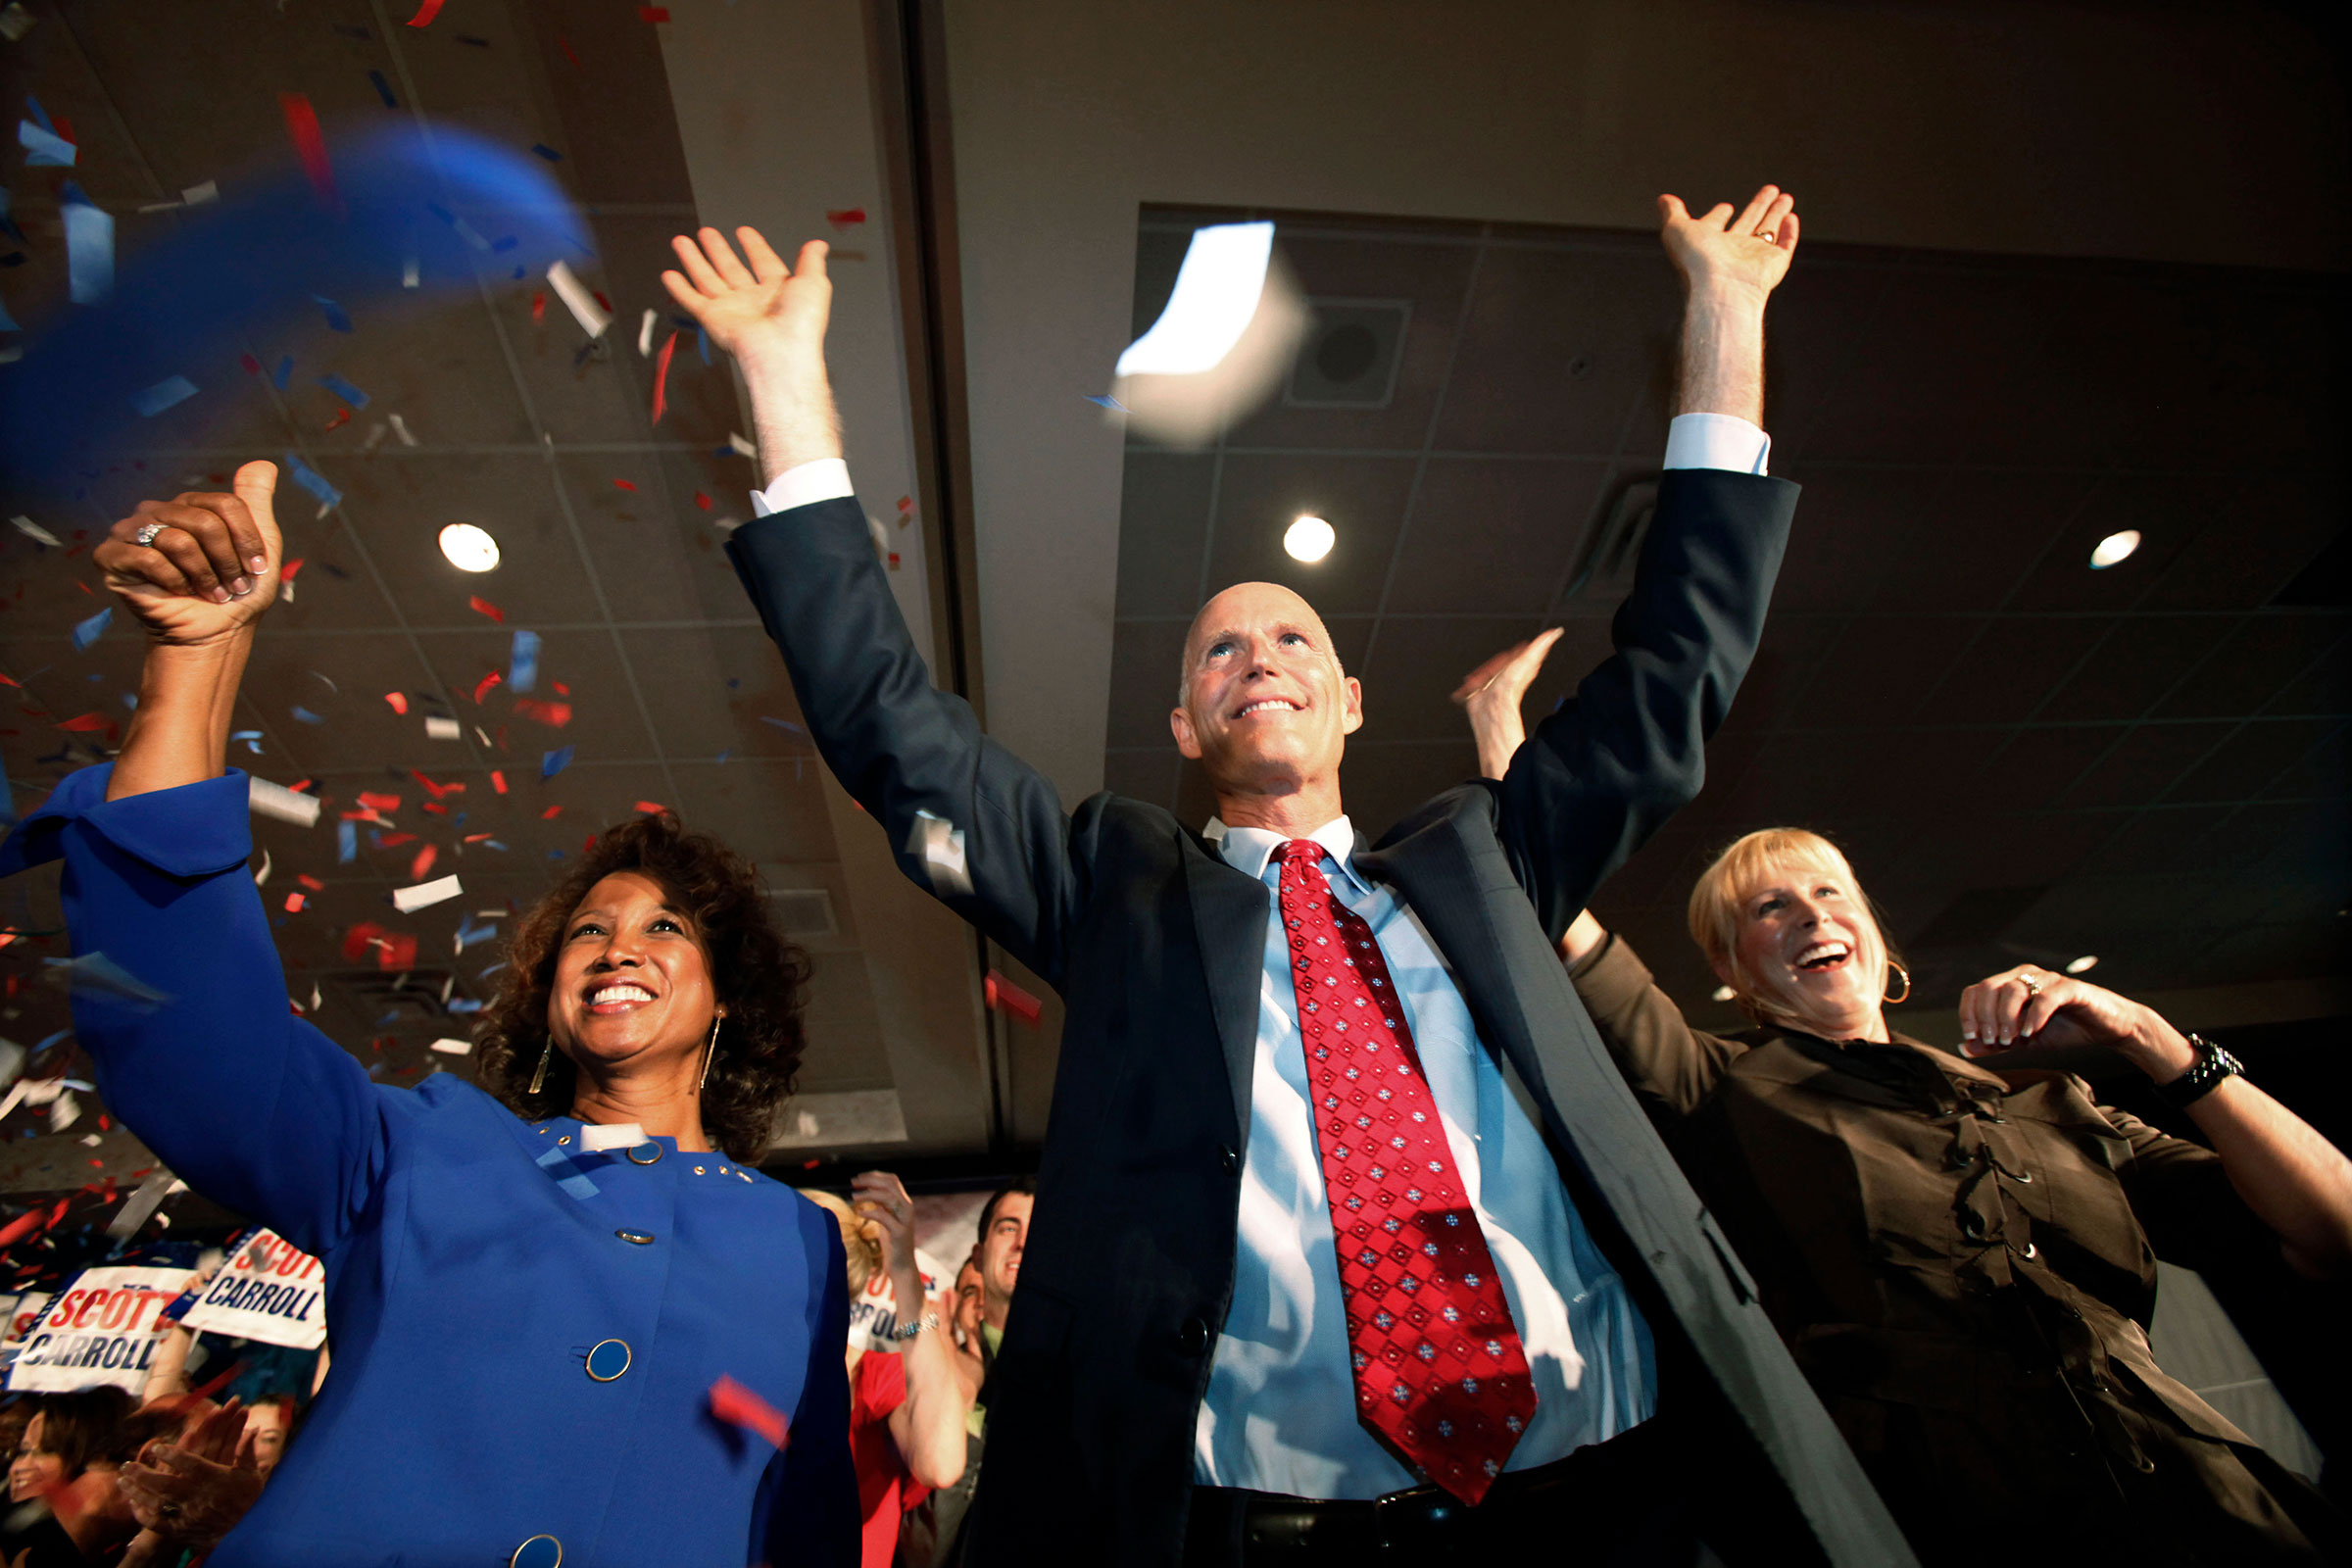 Then Florida Gov.-elect Rick Scott his wife Ann, right, and Lt. Gov.-elect Jennifer Carroll, left, wave to supporters after Scott's victory speech, in Fort Lauderdale, Fla. on Nov. 3, 2010. (Wilfredo Lee—AP)